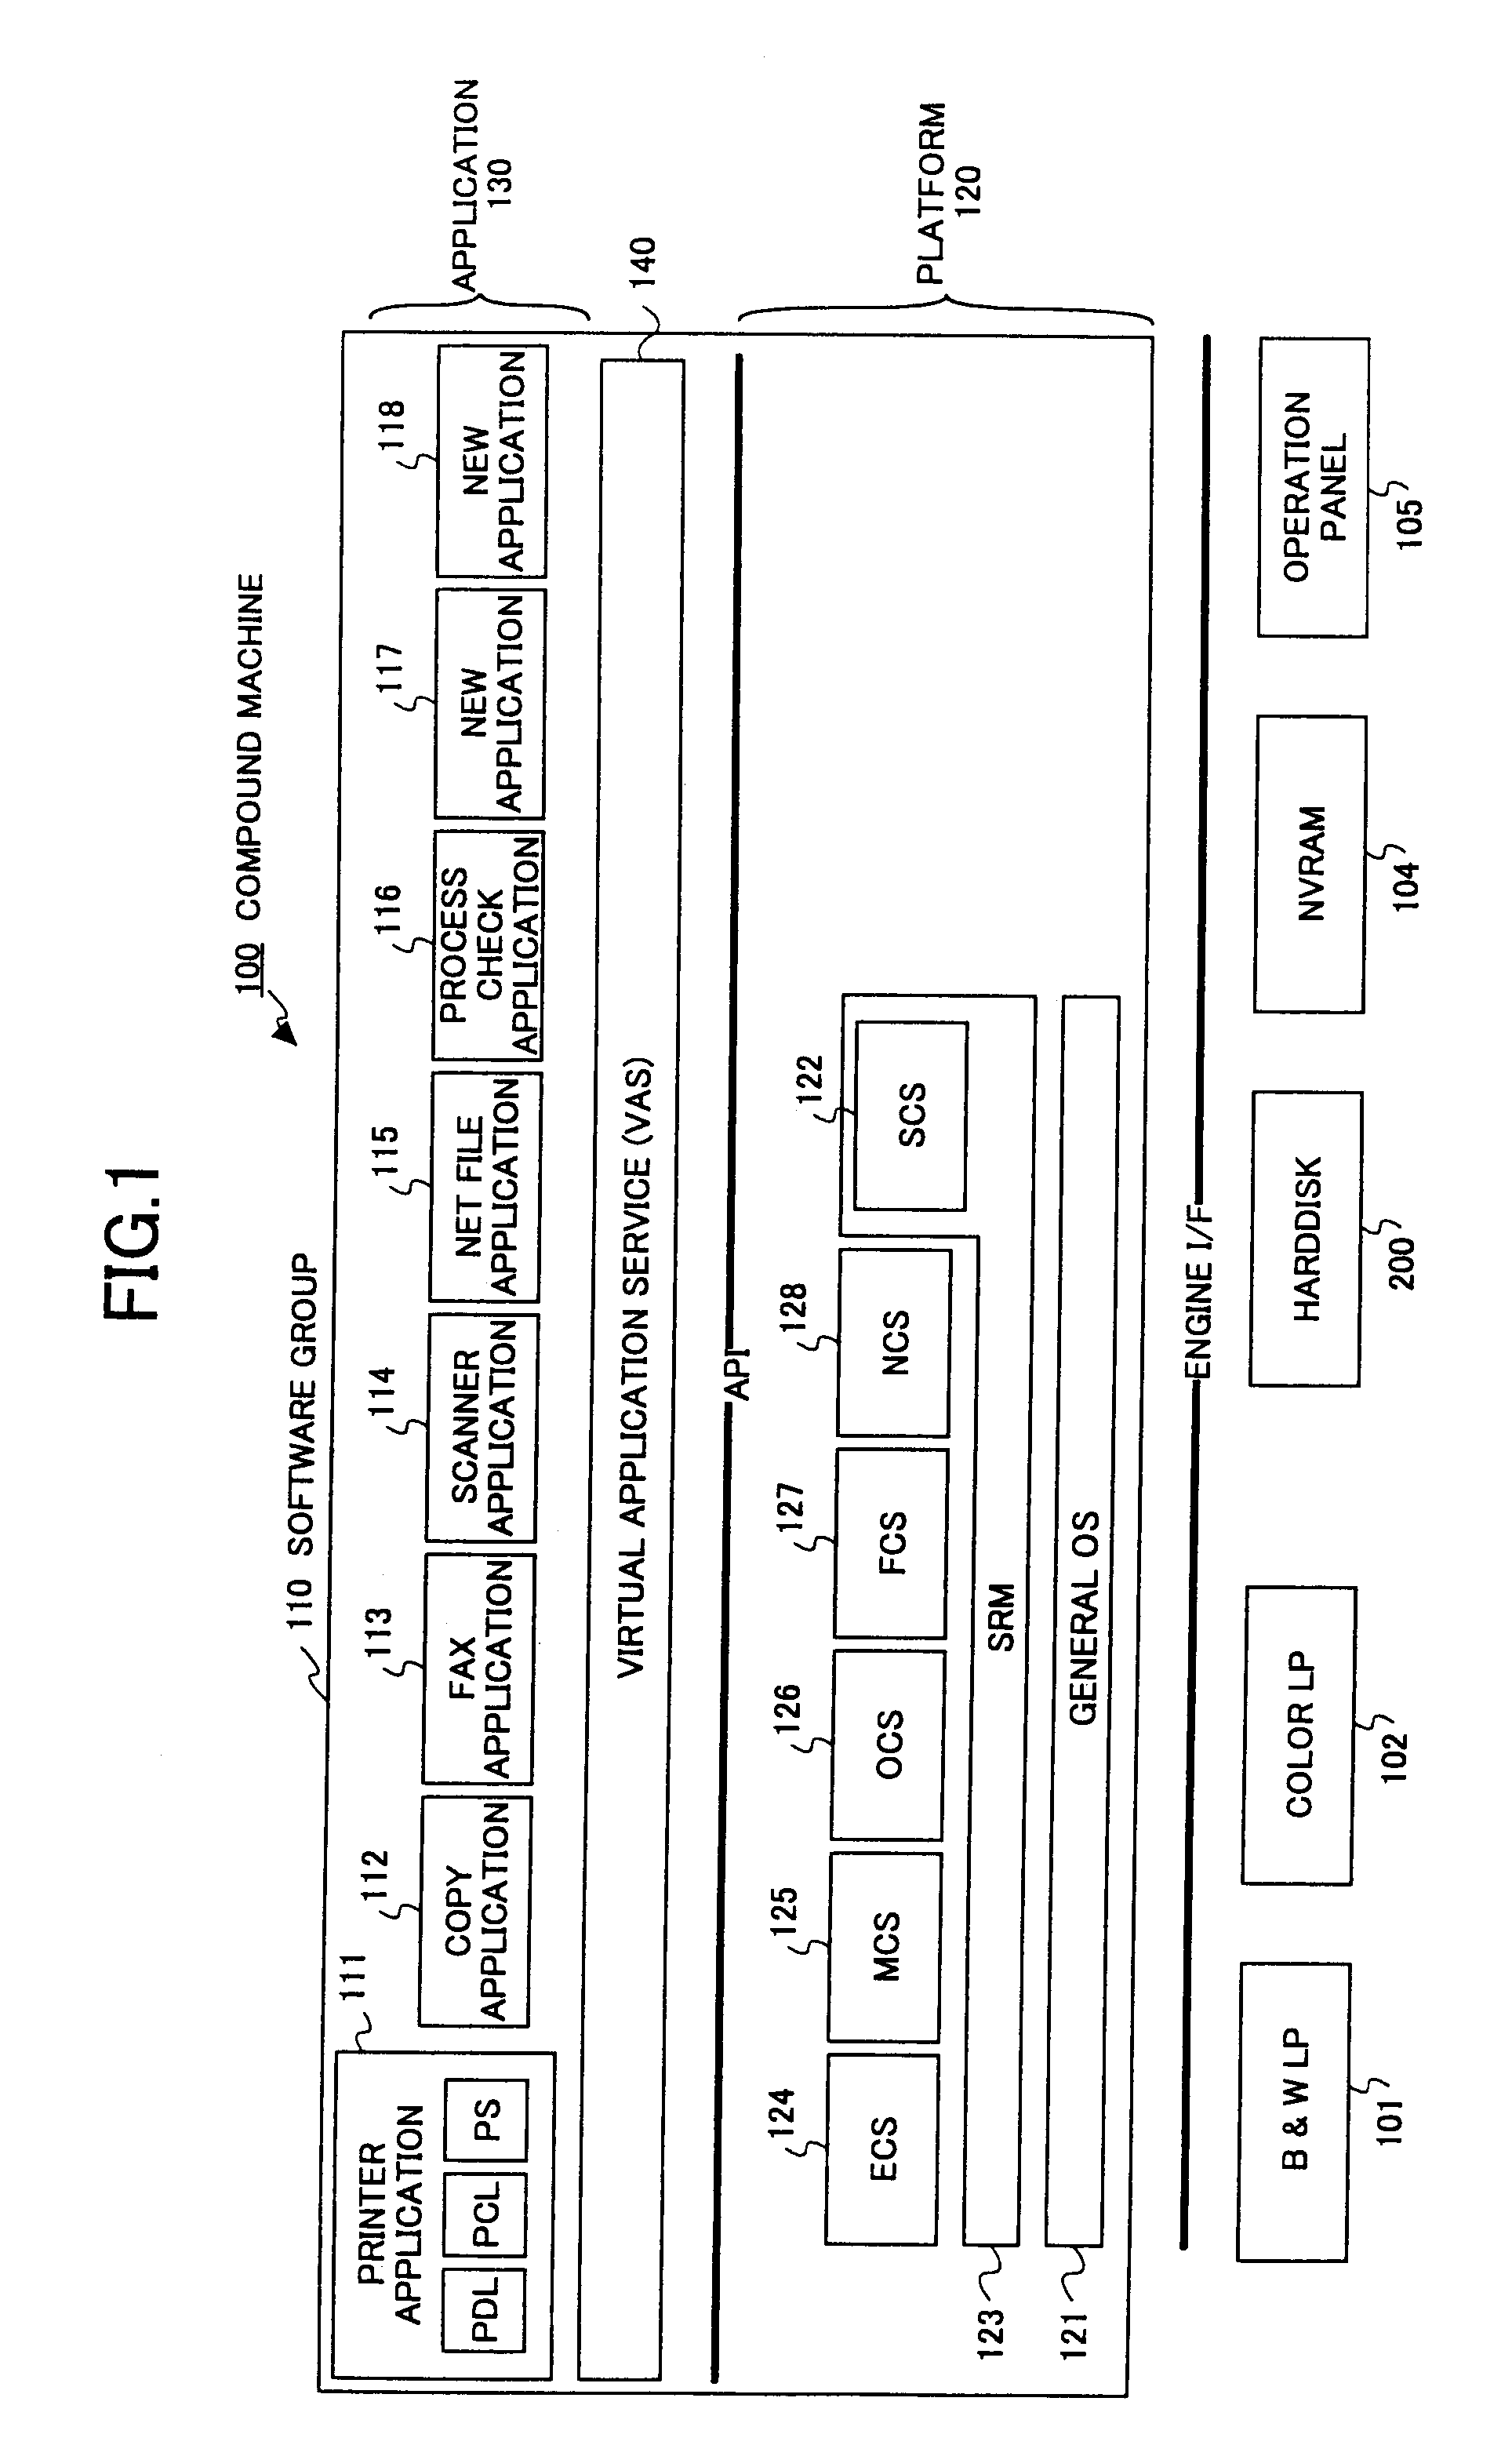 Image forming apparatus and methods used in the image forming apparatus